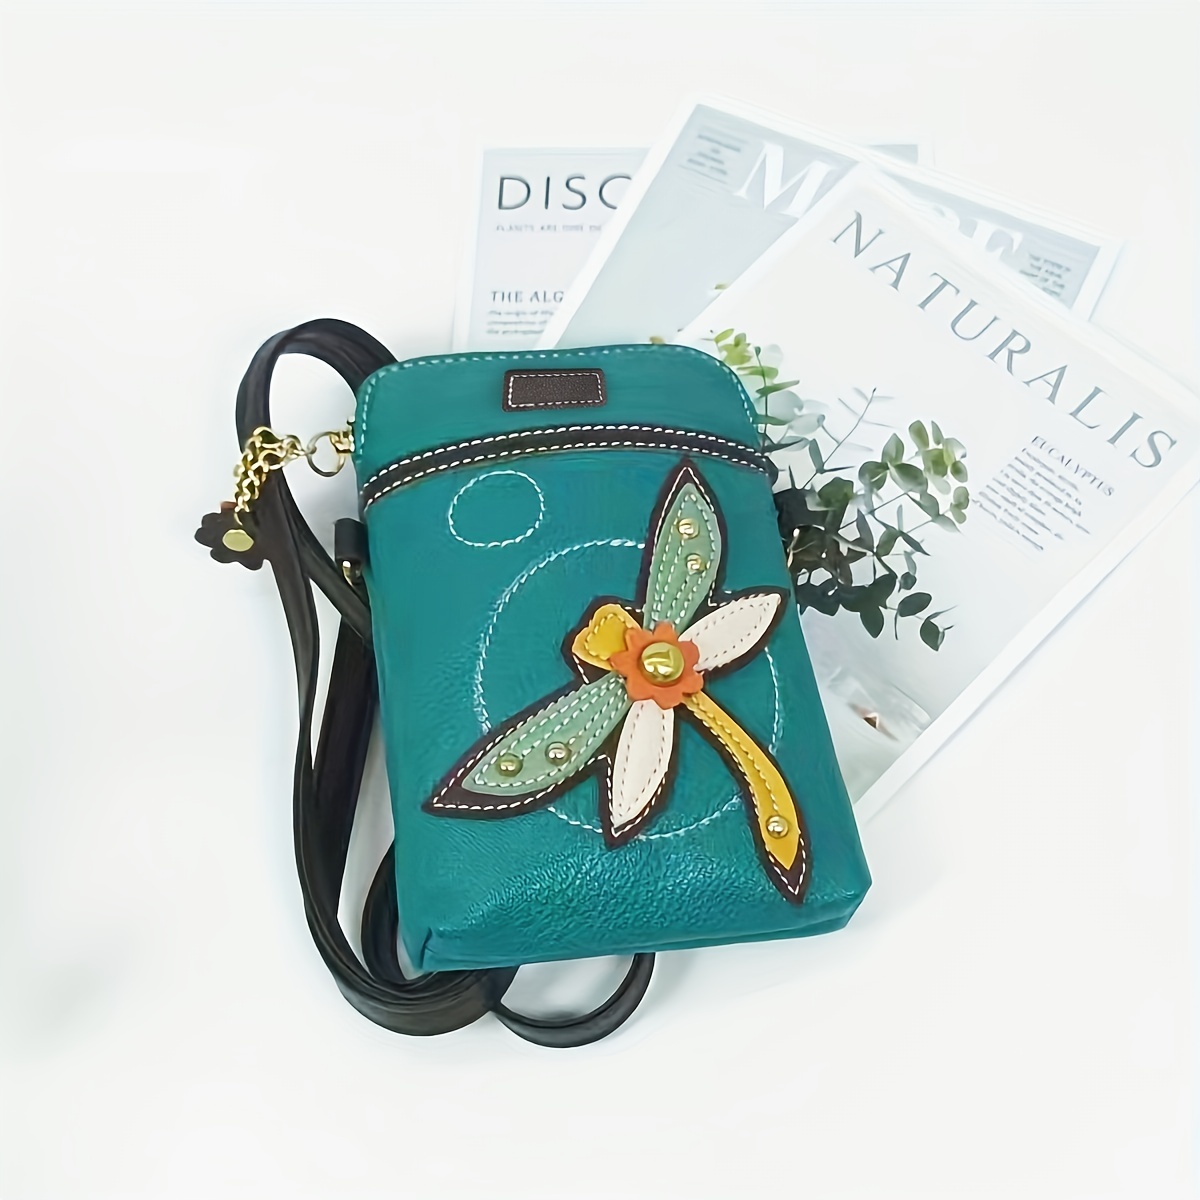 Retro Mini Crossbody Bag, Dragonfly Patch Embroidery Cell Phone